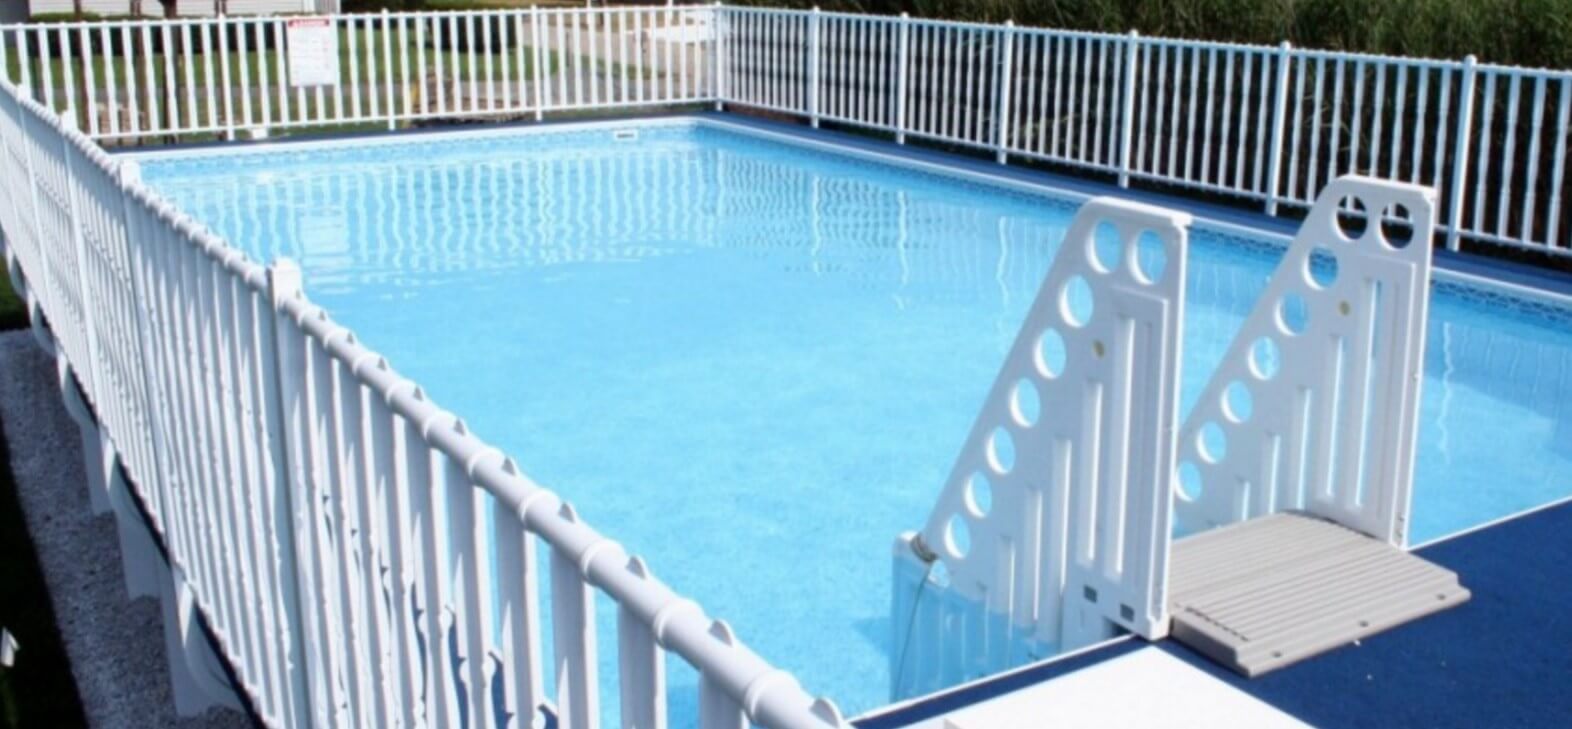 Admirals Walk Pool - Rectangle Pool With Deck and Fence.